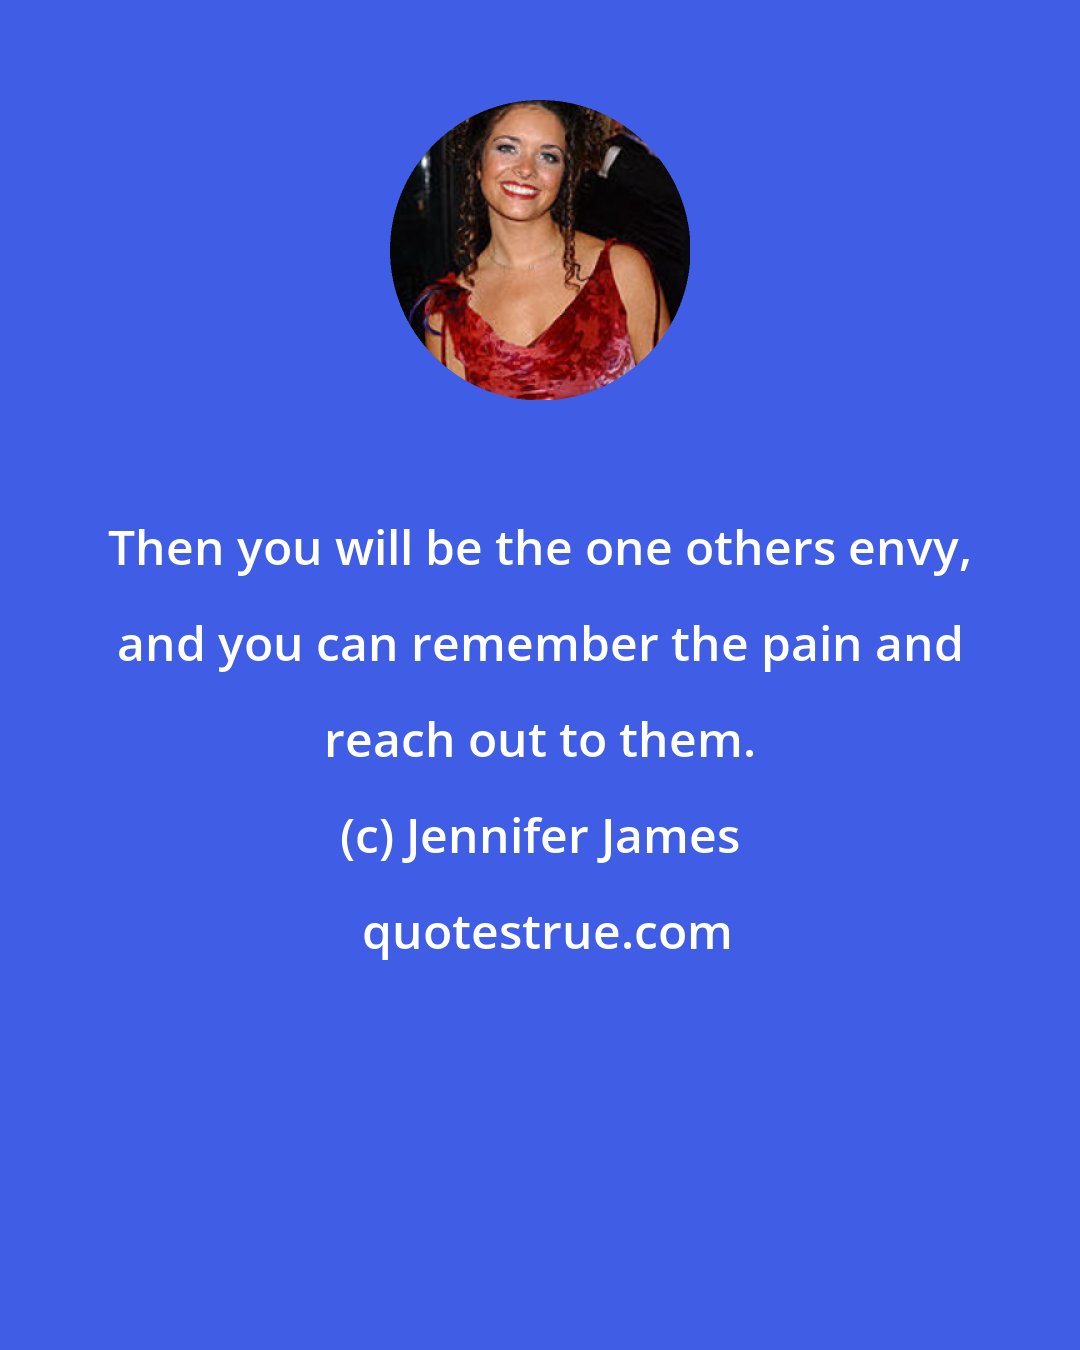 Jennifer James: Then you will be the one others envy, and you can remember the pain and reach out to them.